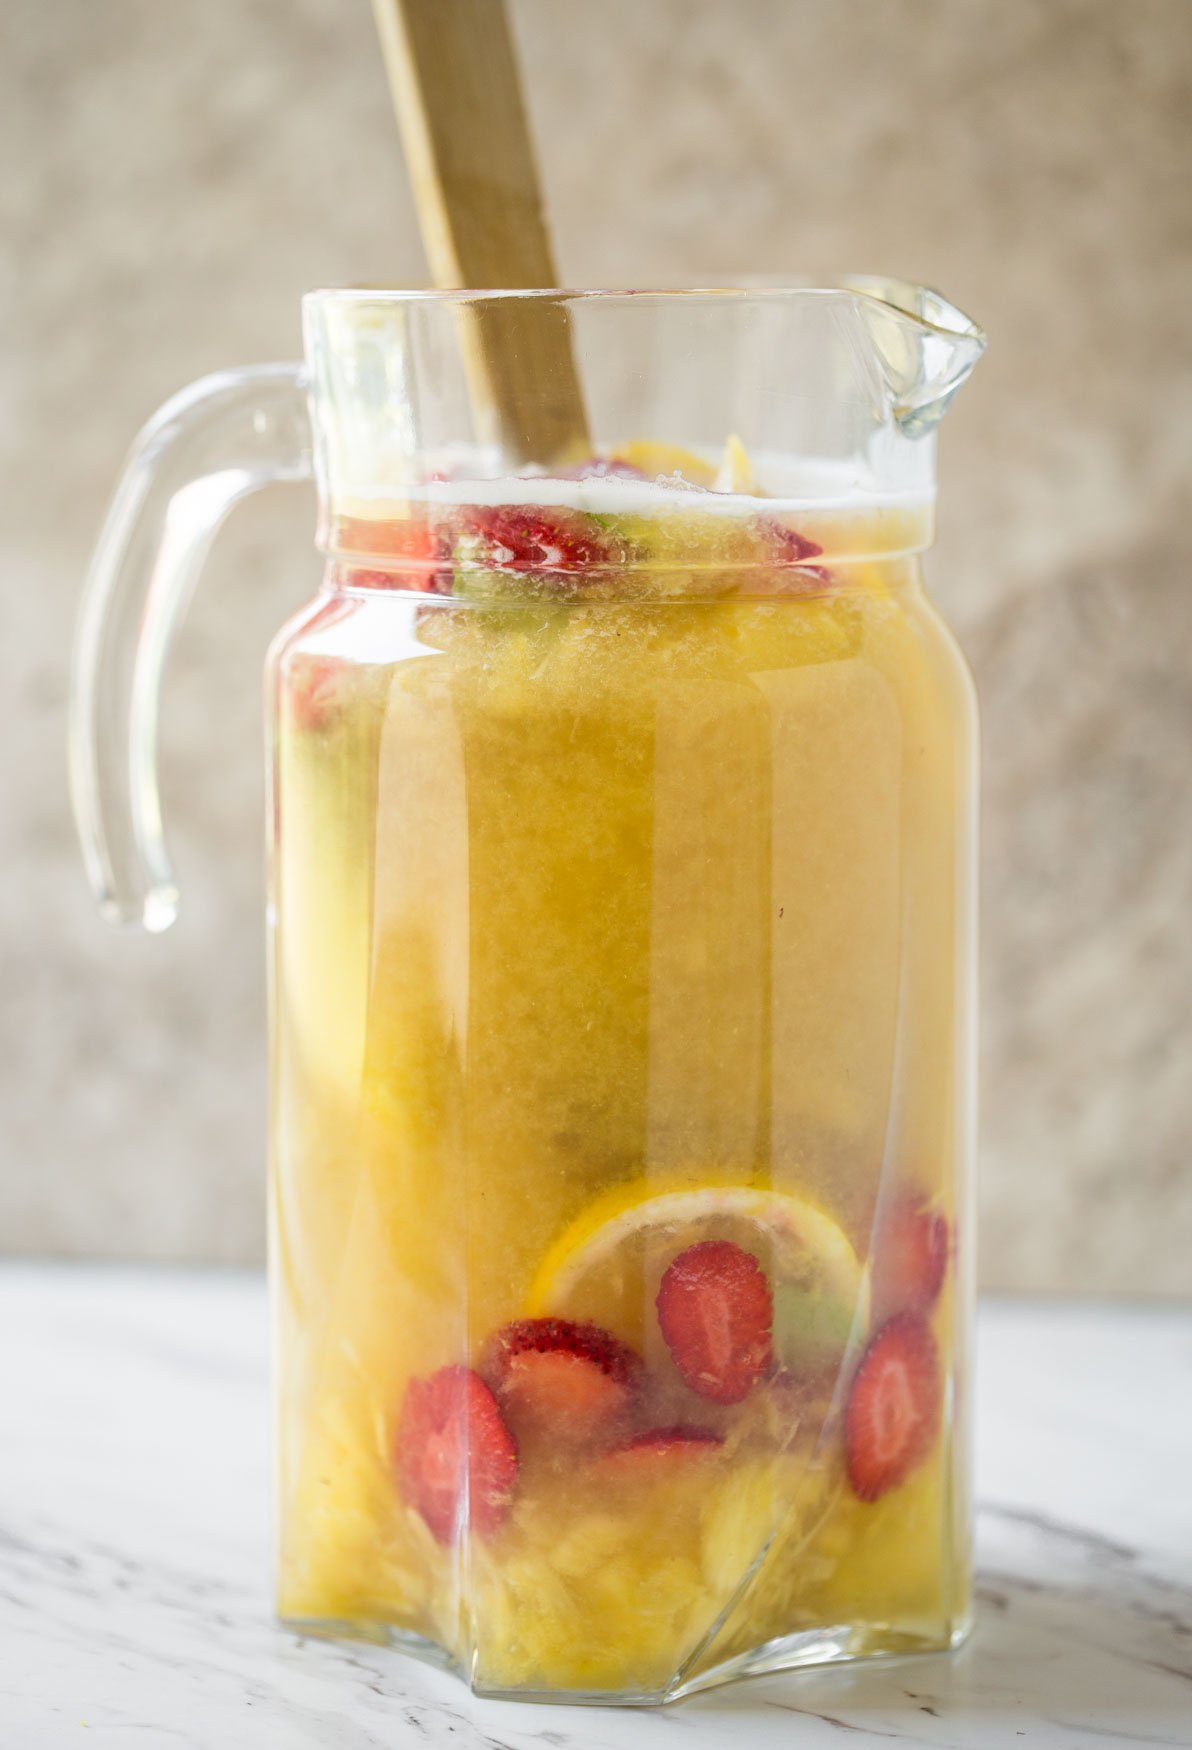 This pineapple strawberry sangria isÂ aÂ perfect non-alcoholic summer drink to enjoy fresh seasonal fruits and beat the summer heat. It is prepared using fresh strawberries and pineapple. | #watchwhatueat #nonalcoholic #summerdrink #strawberry #nonalcoholicsangria #sangria